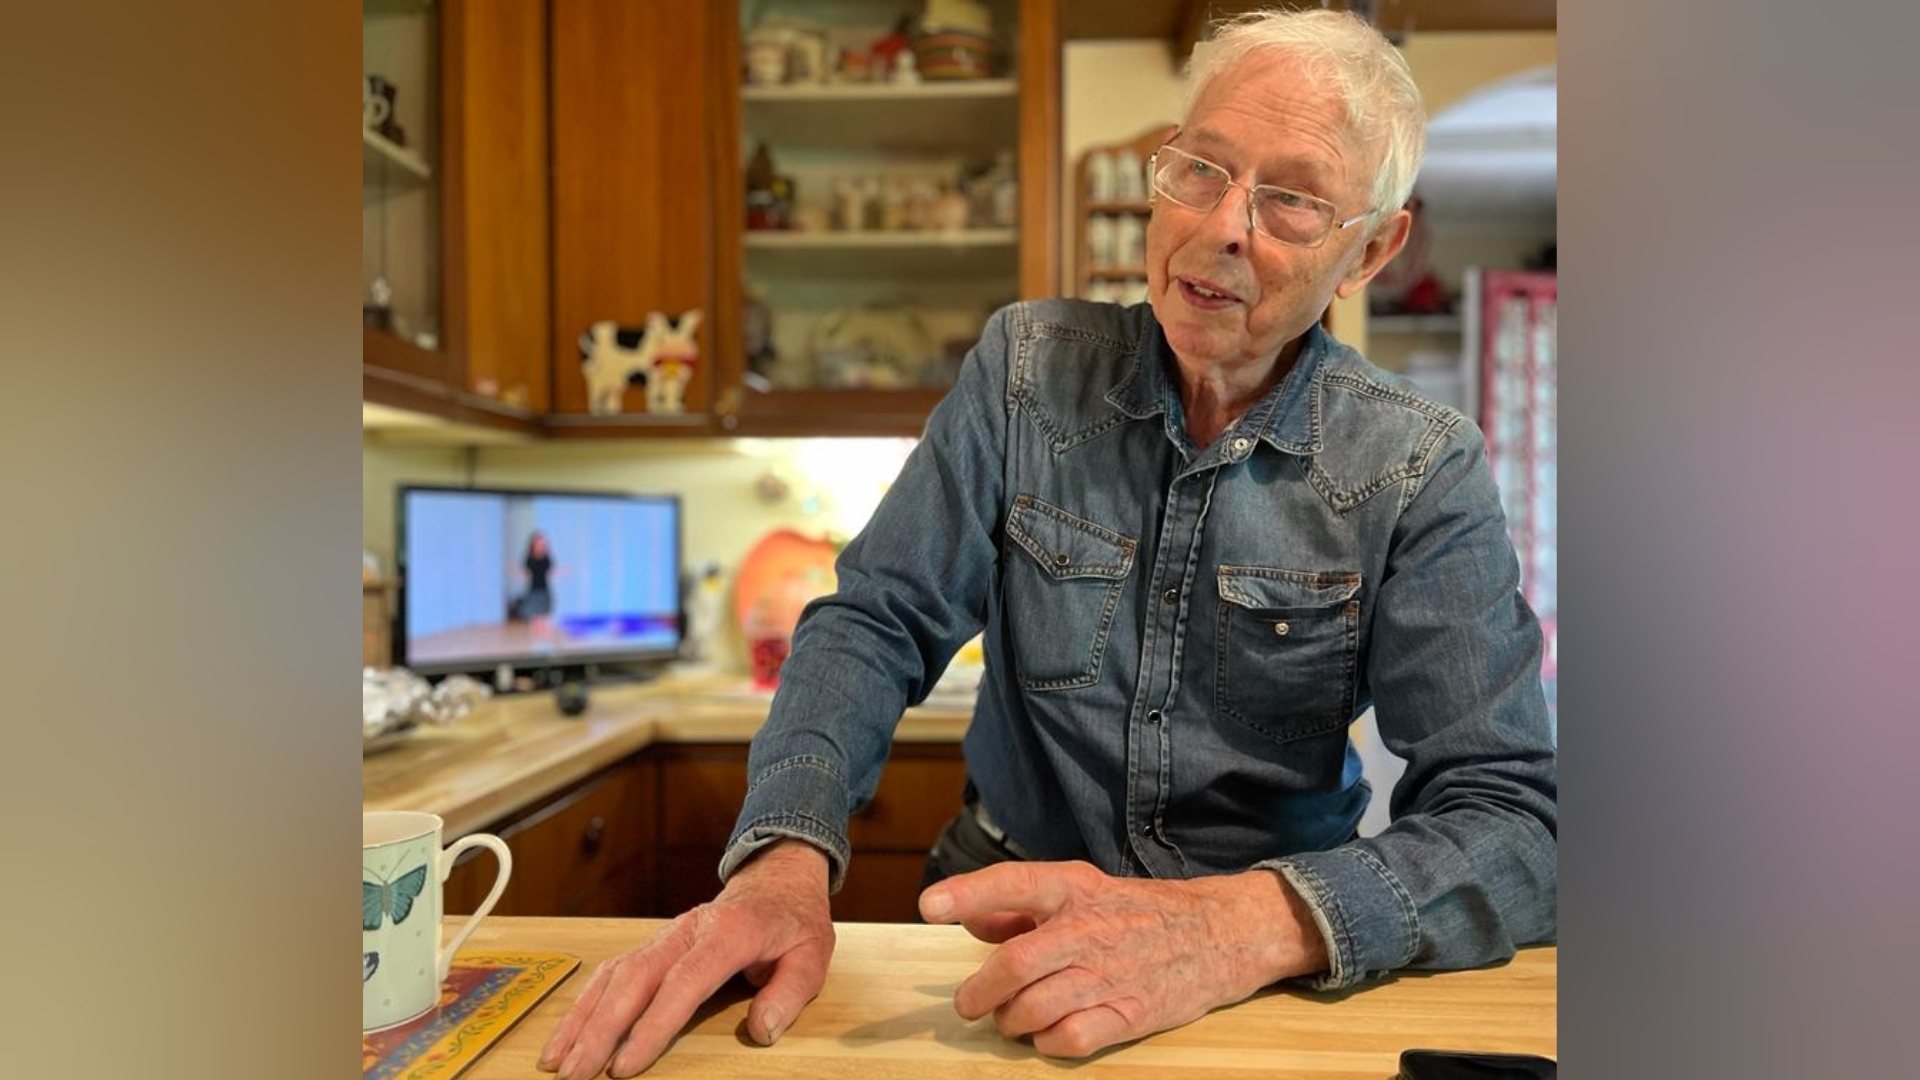 Jimmy McFarlane, 83, developed pleural plaques after exposer to asbestos.